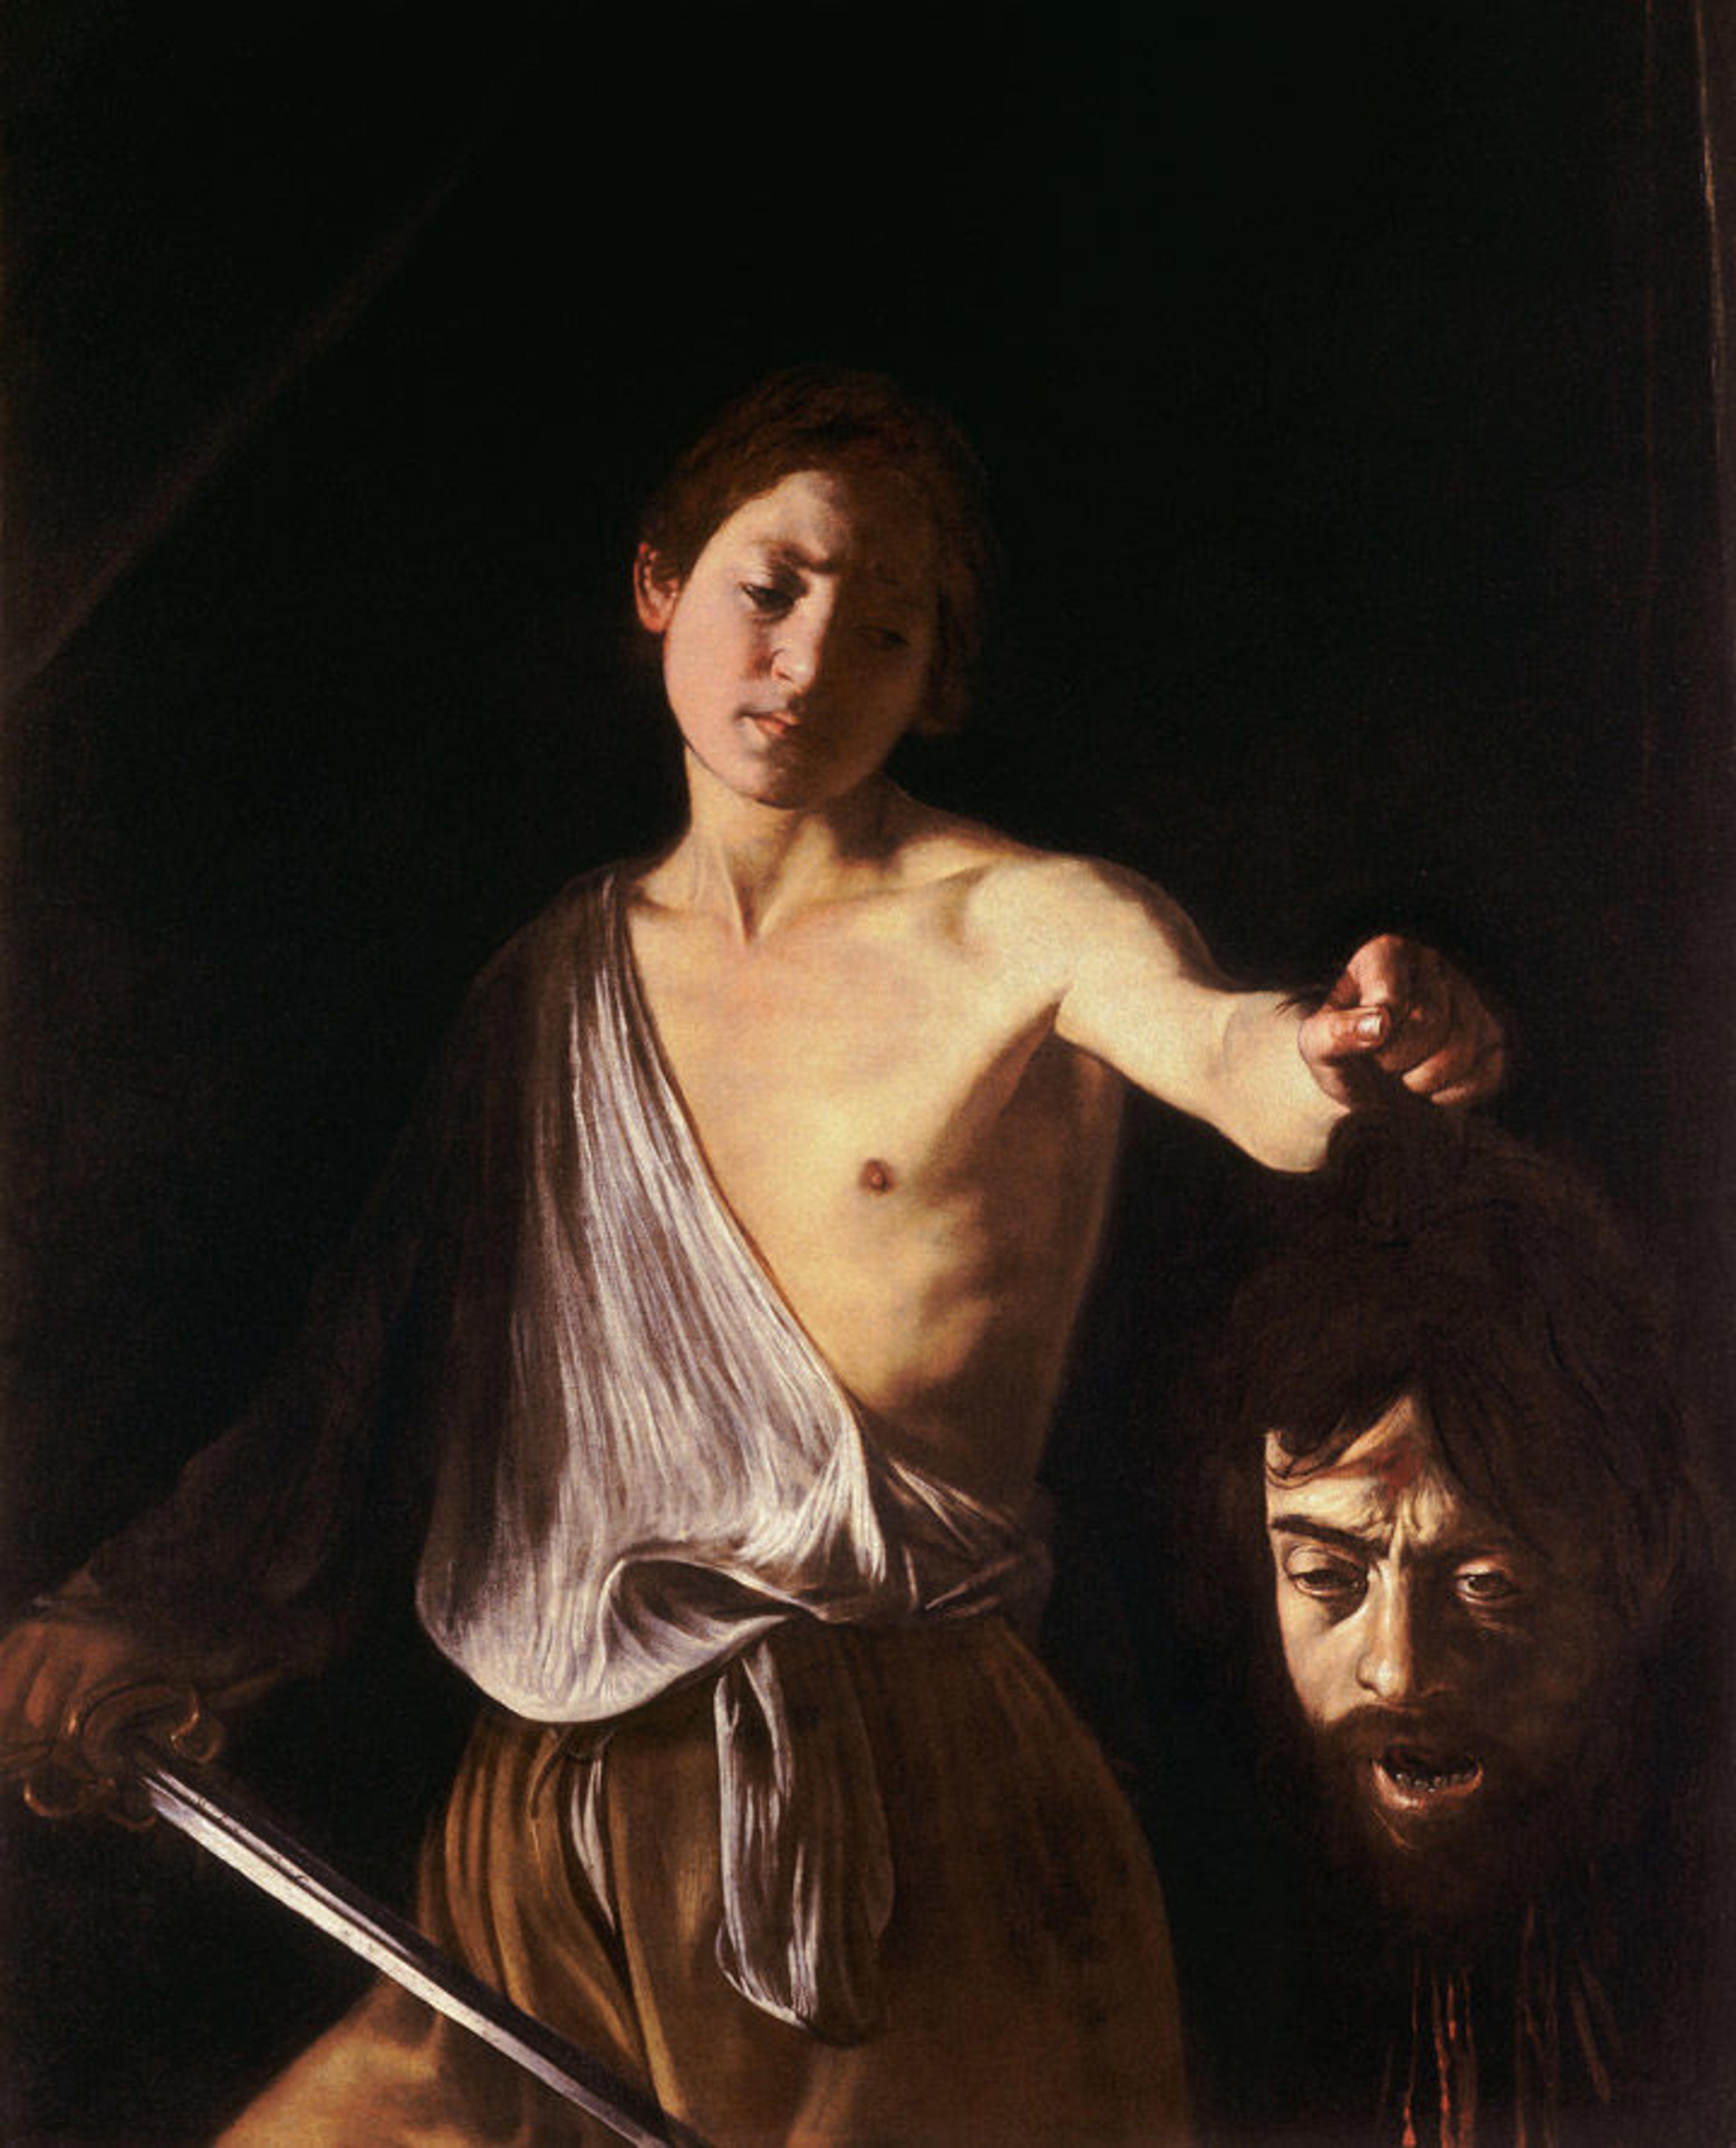 A dark Italian Baroque painting showing a young David holding a sword and the severed head of Goliath